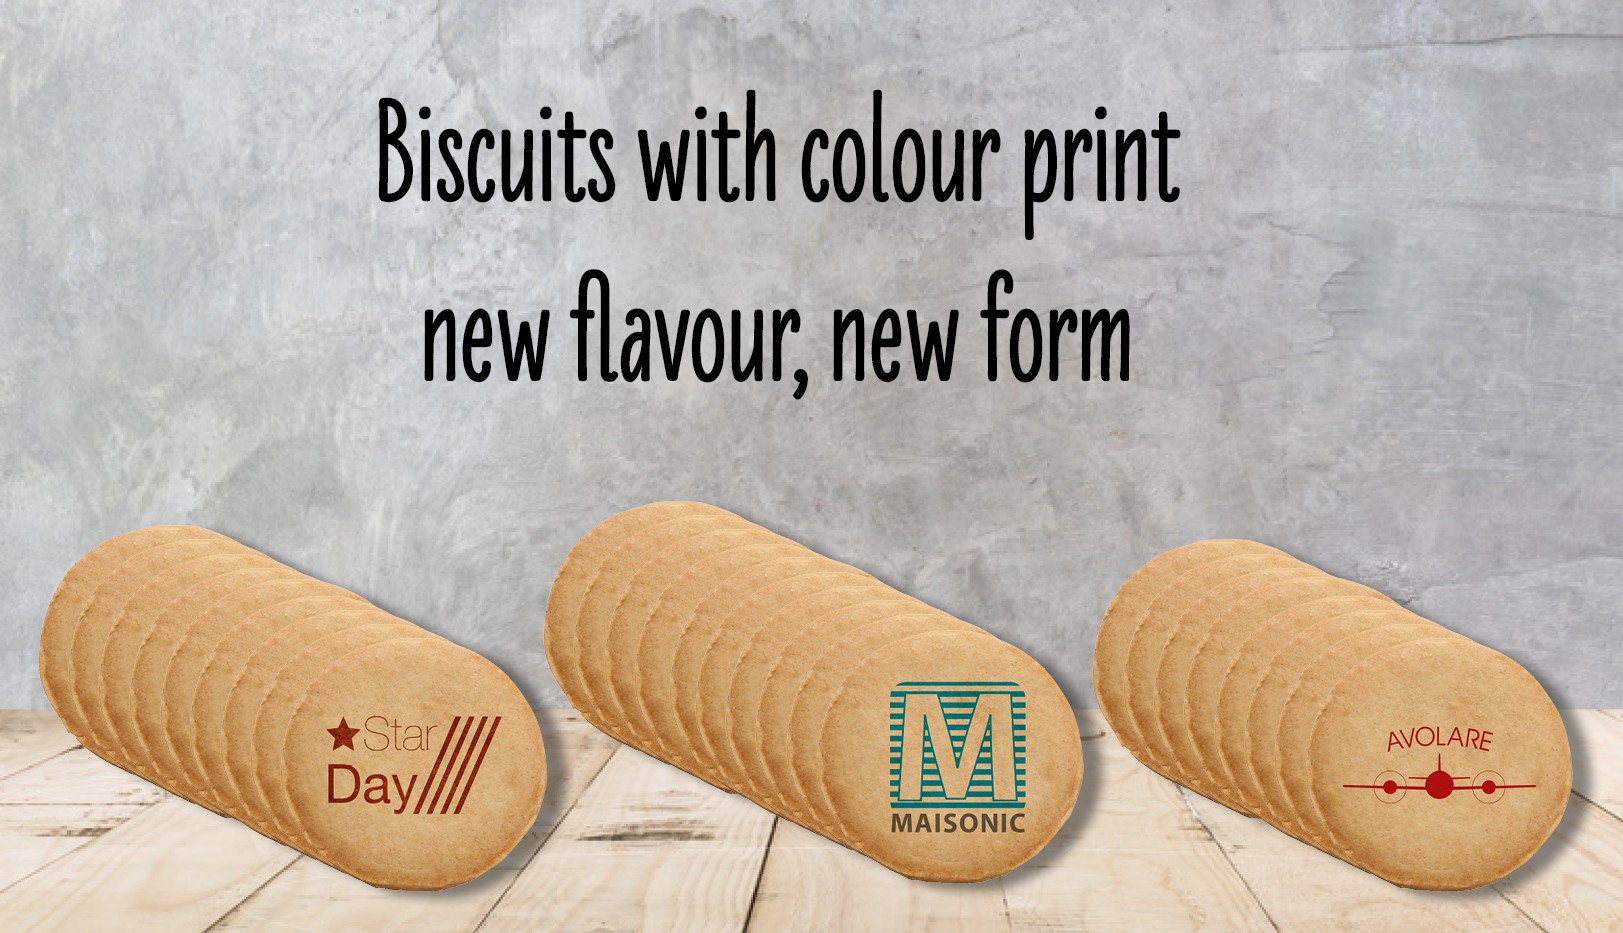 Biscuits - embossed, printed or individuall shape